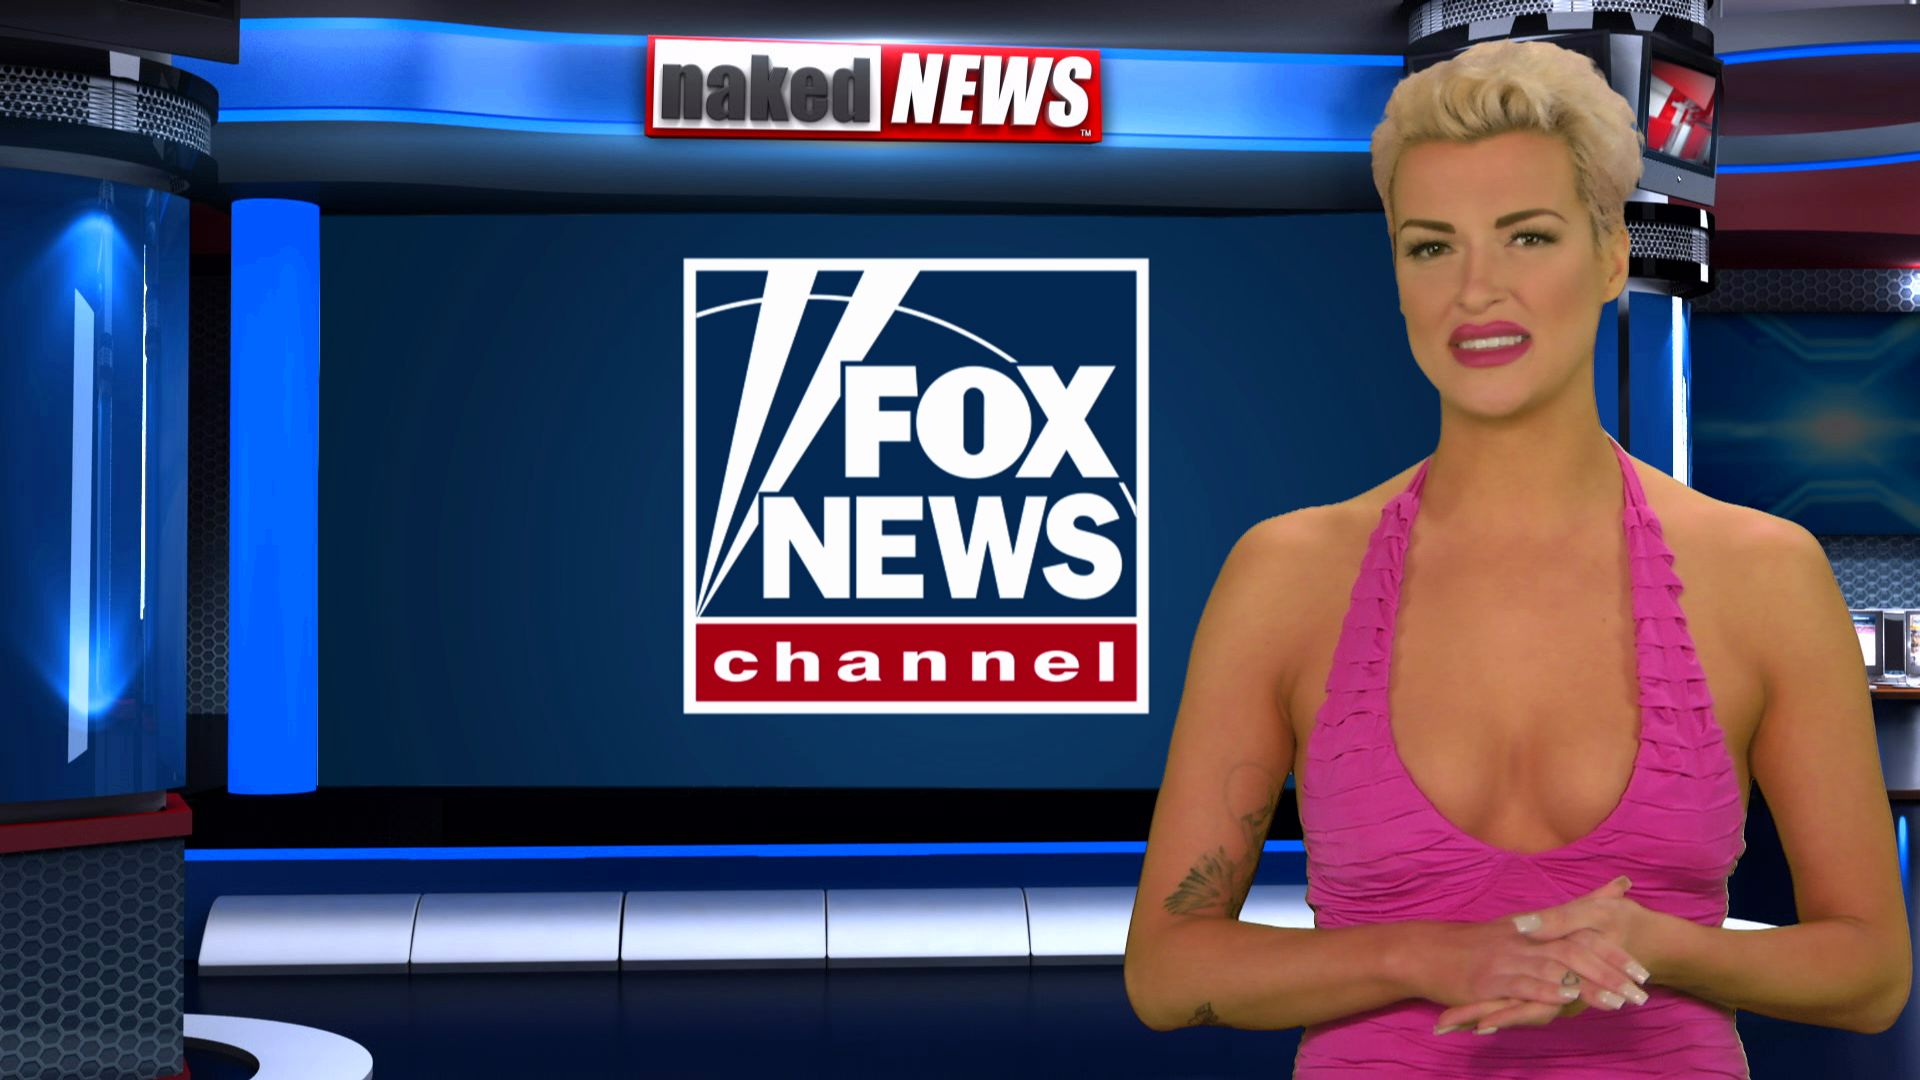 brenda gaylor recommends fox news women naked pic